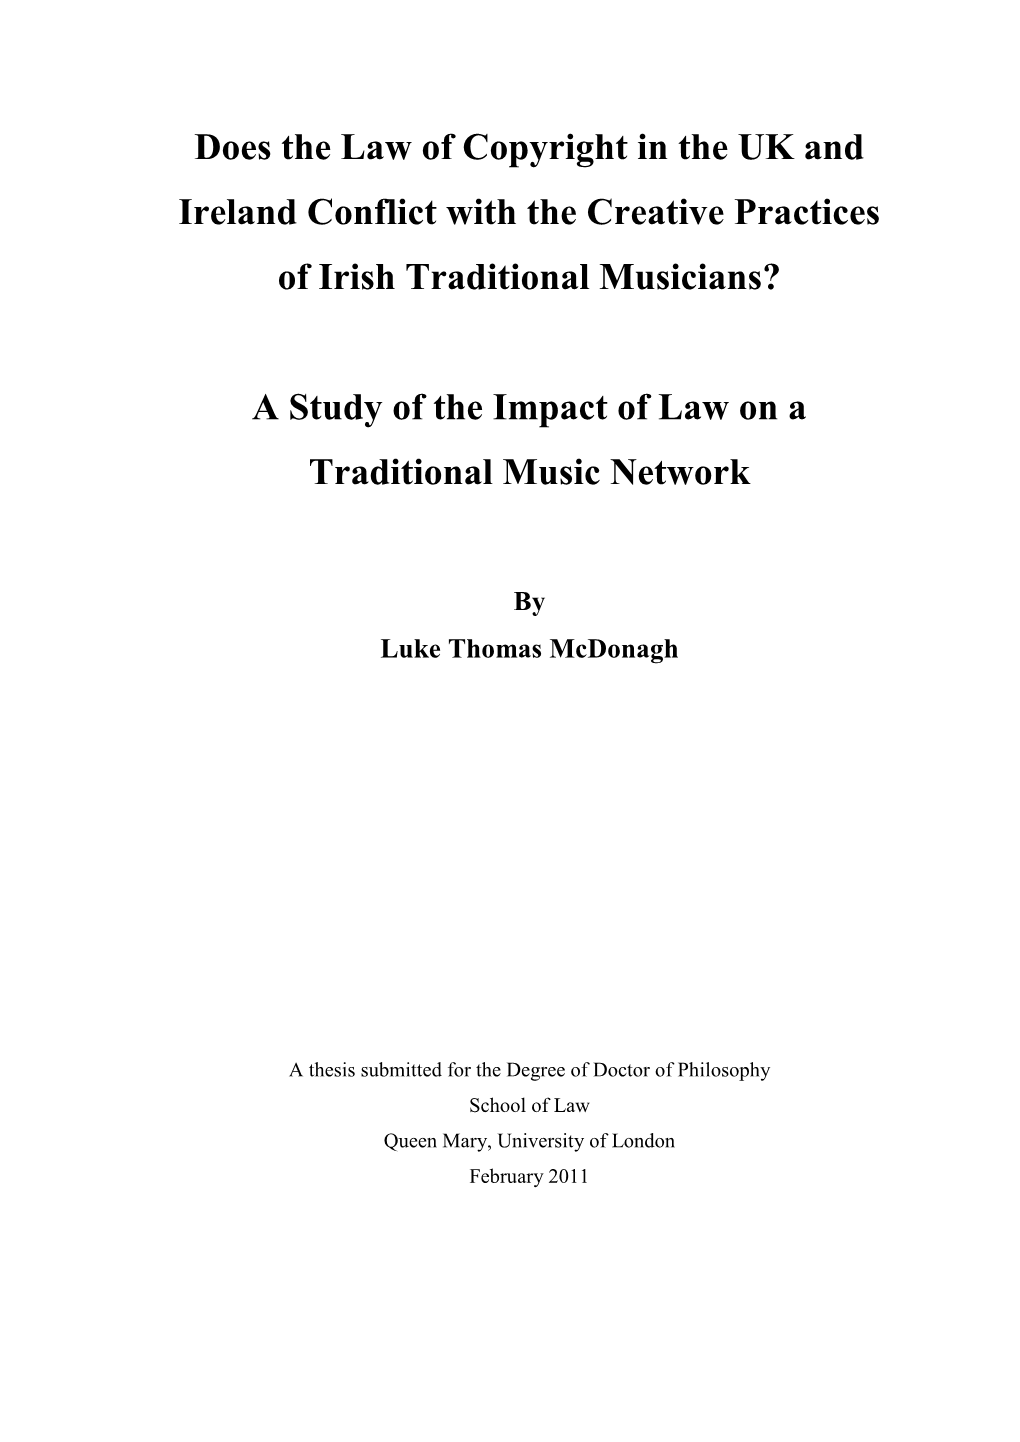 Does the Law of Copyright in the UK and Ireland Conflict with the Creative Practices of Irish Traditional Musicians?